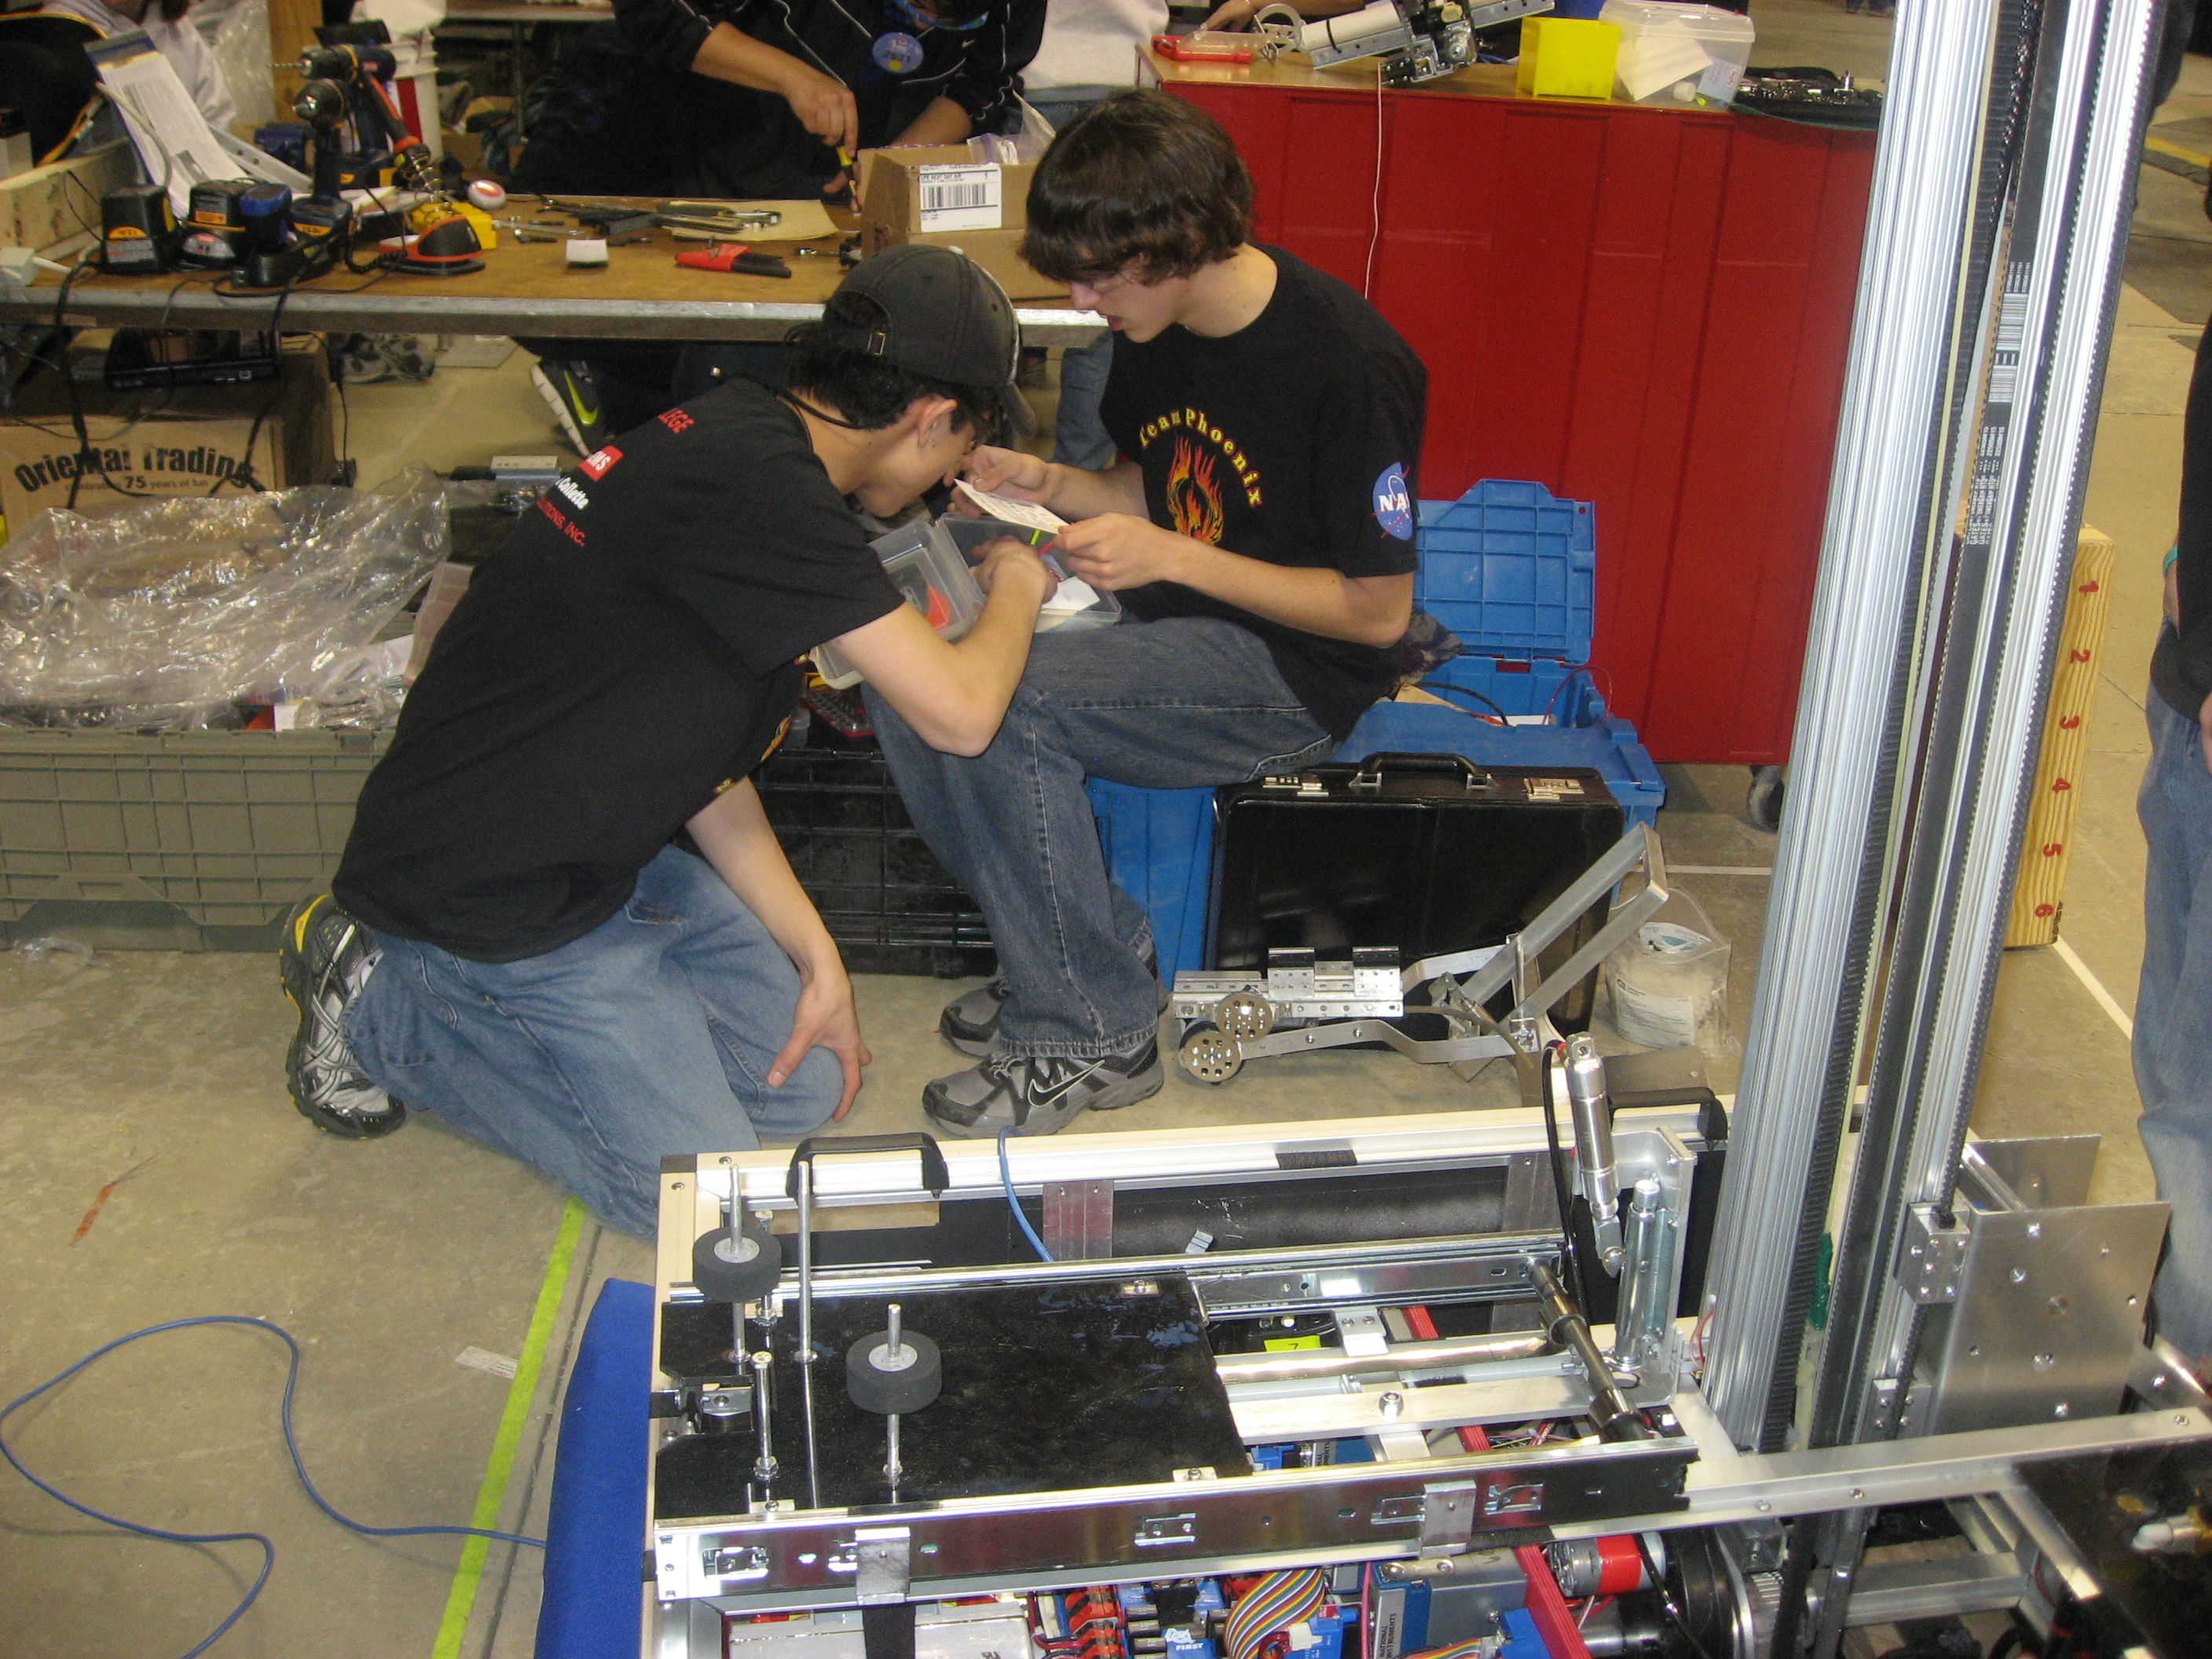 Gathering parts for the robot